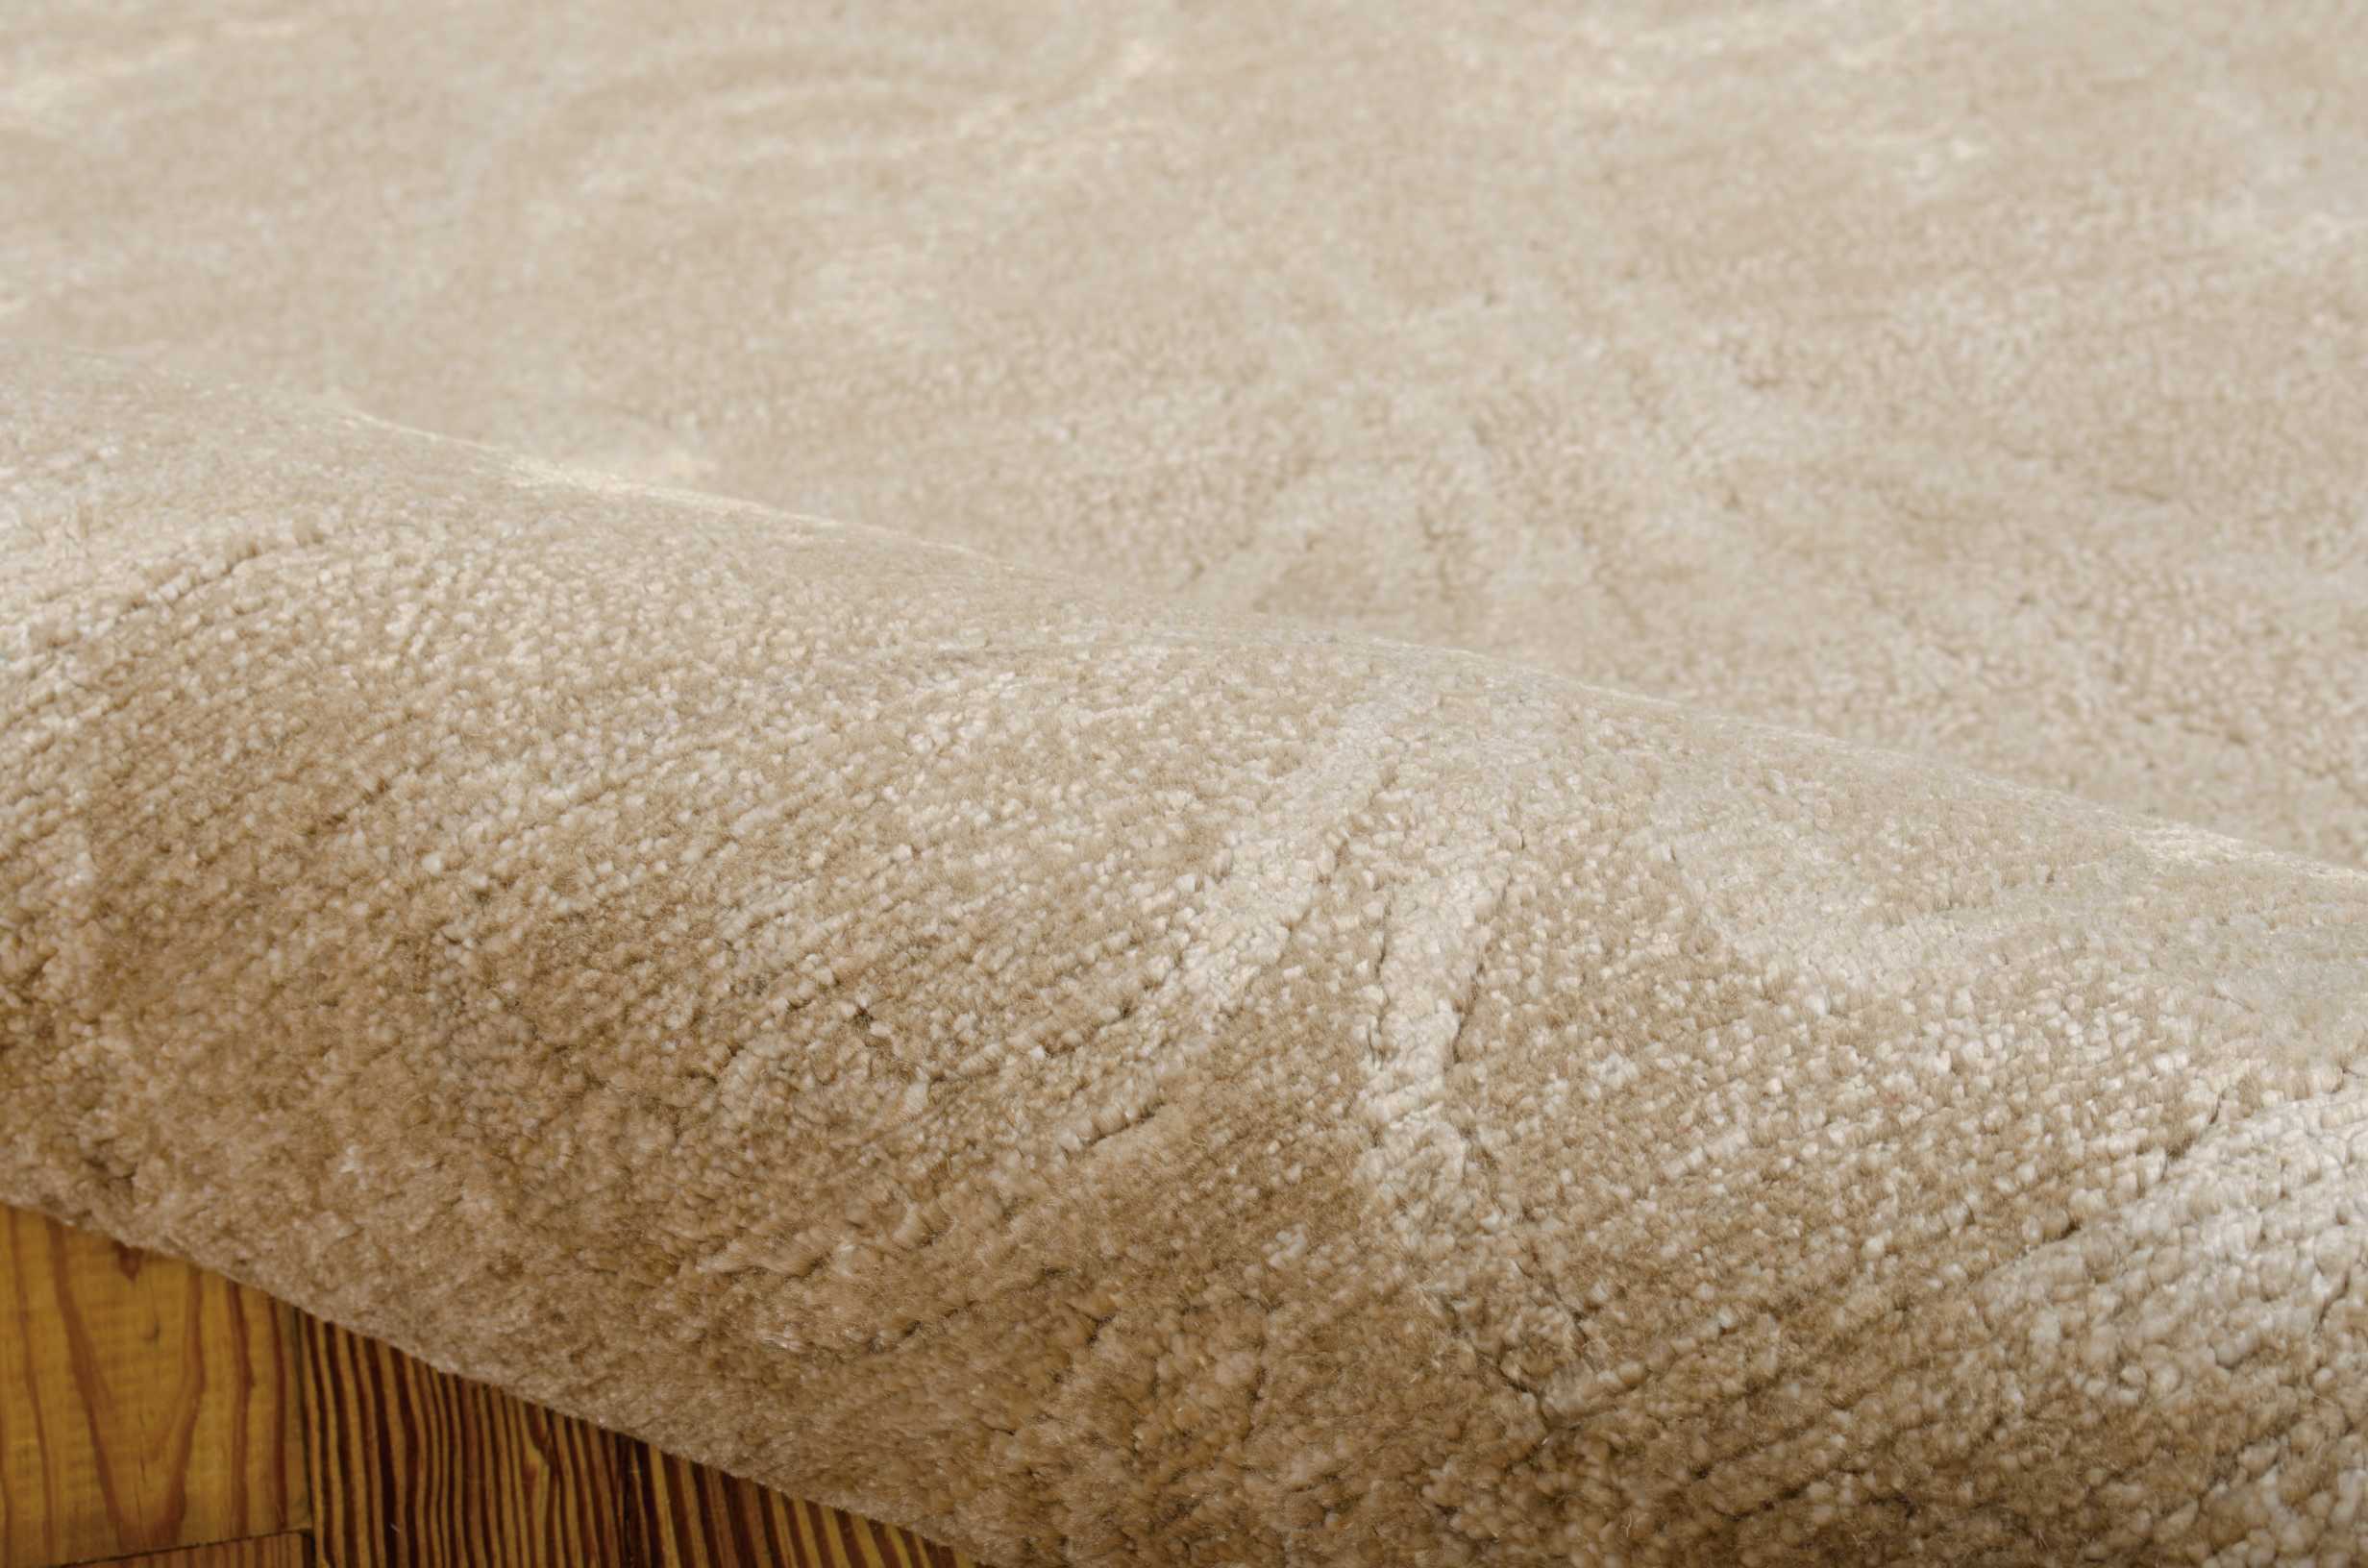 Close-up view of a new, plush beige carpet over wooden floor.